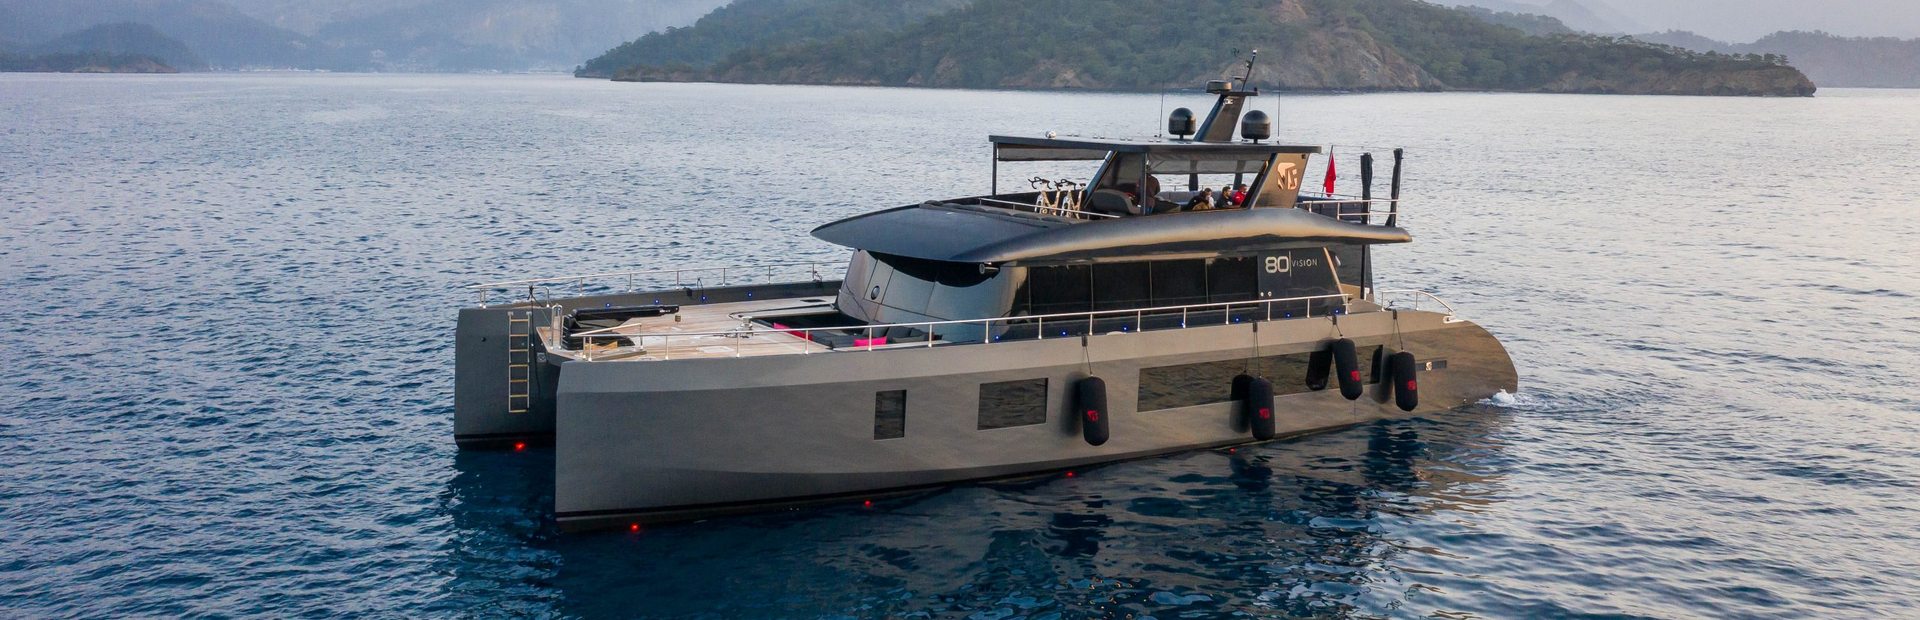 VisionF 80 Yacht